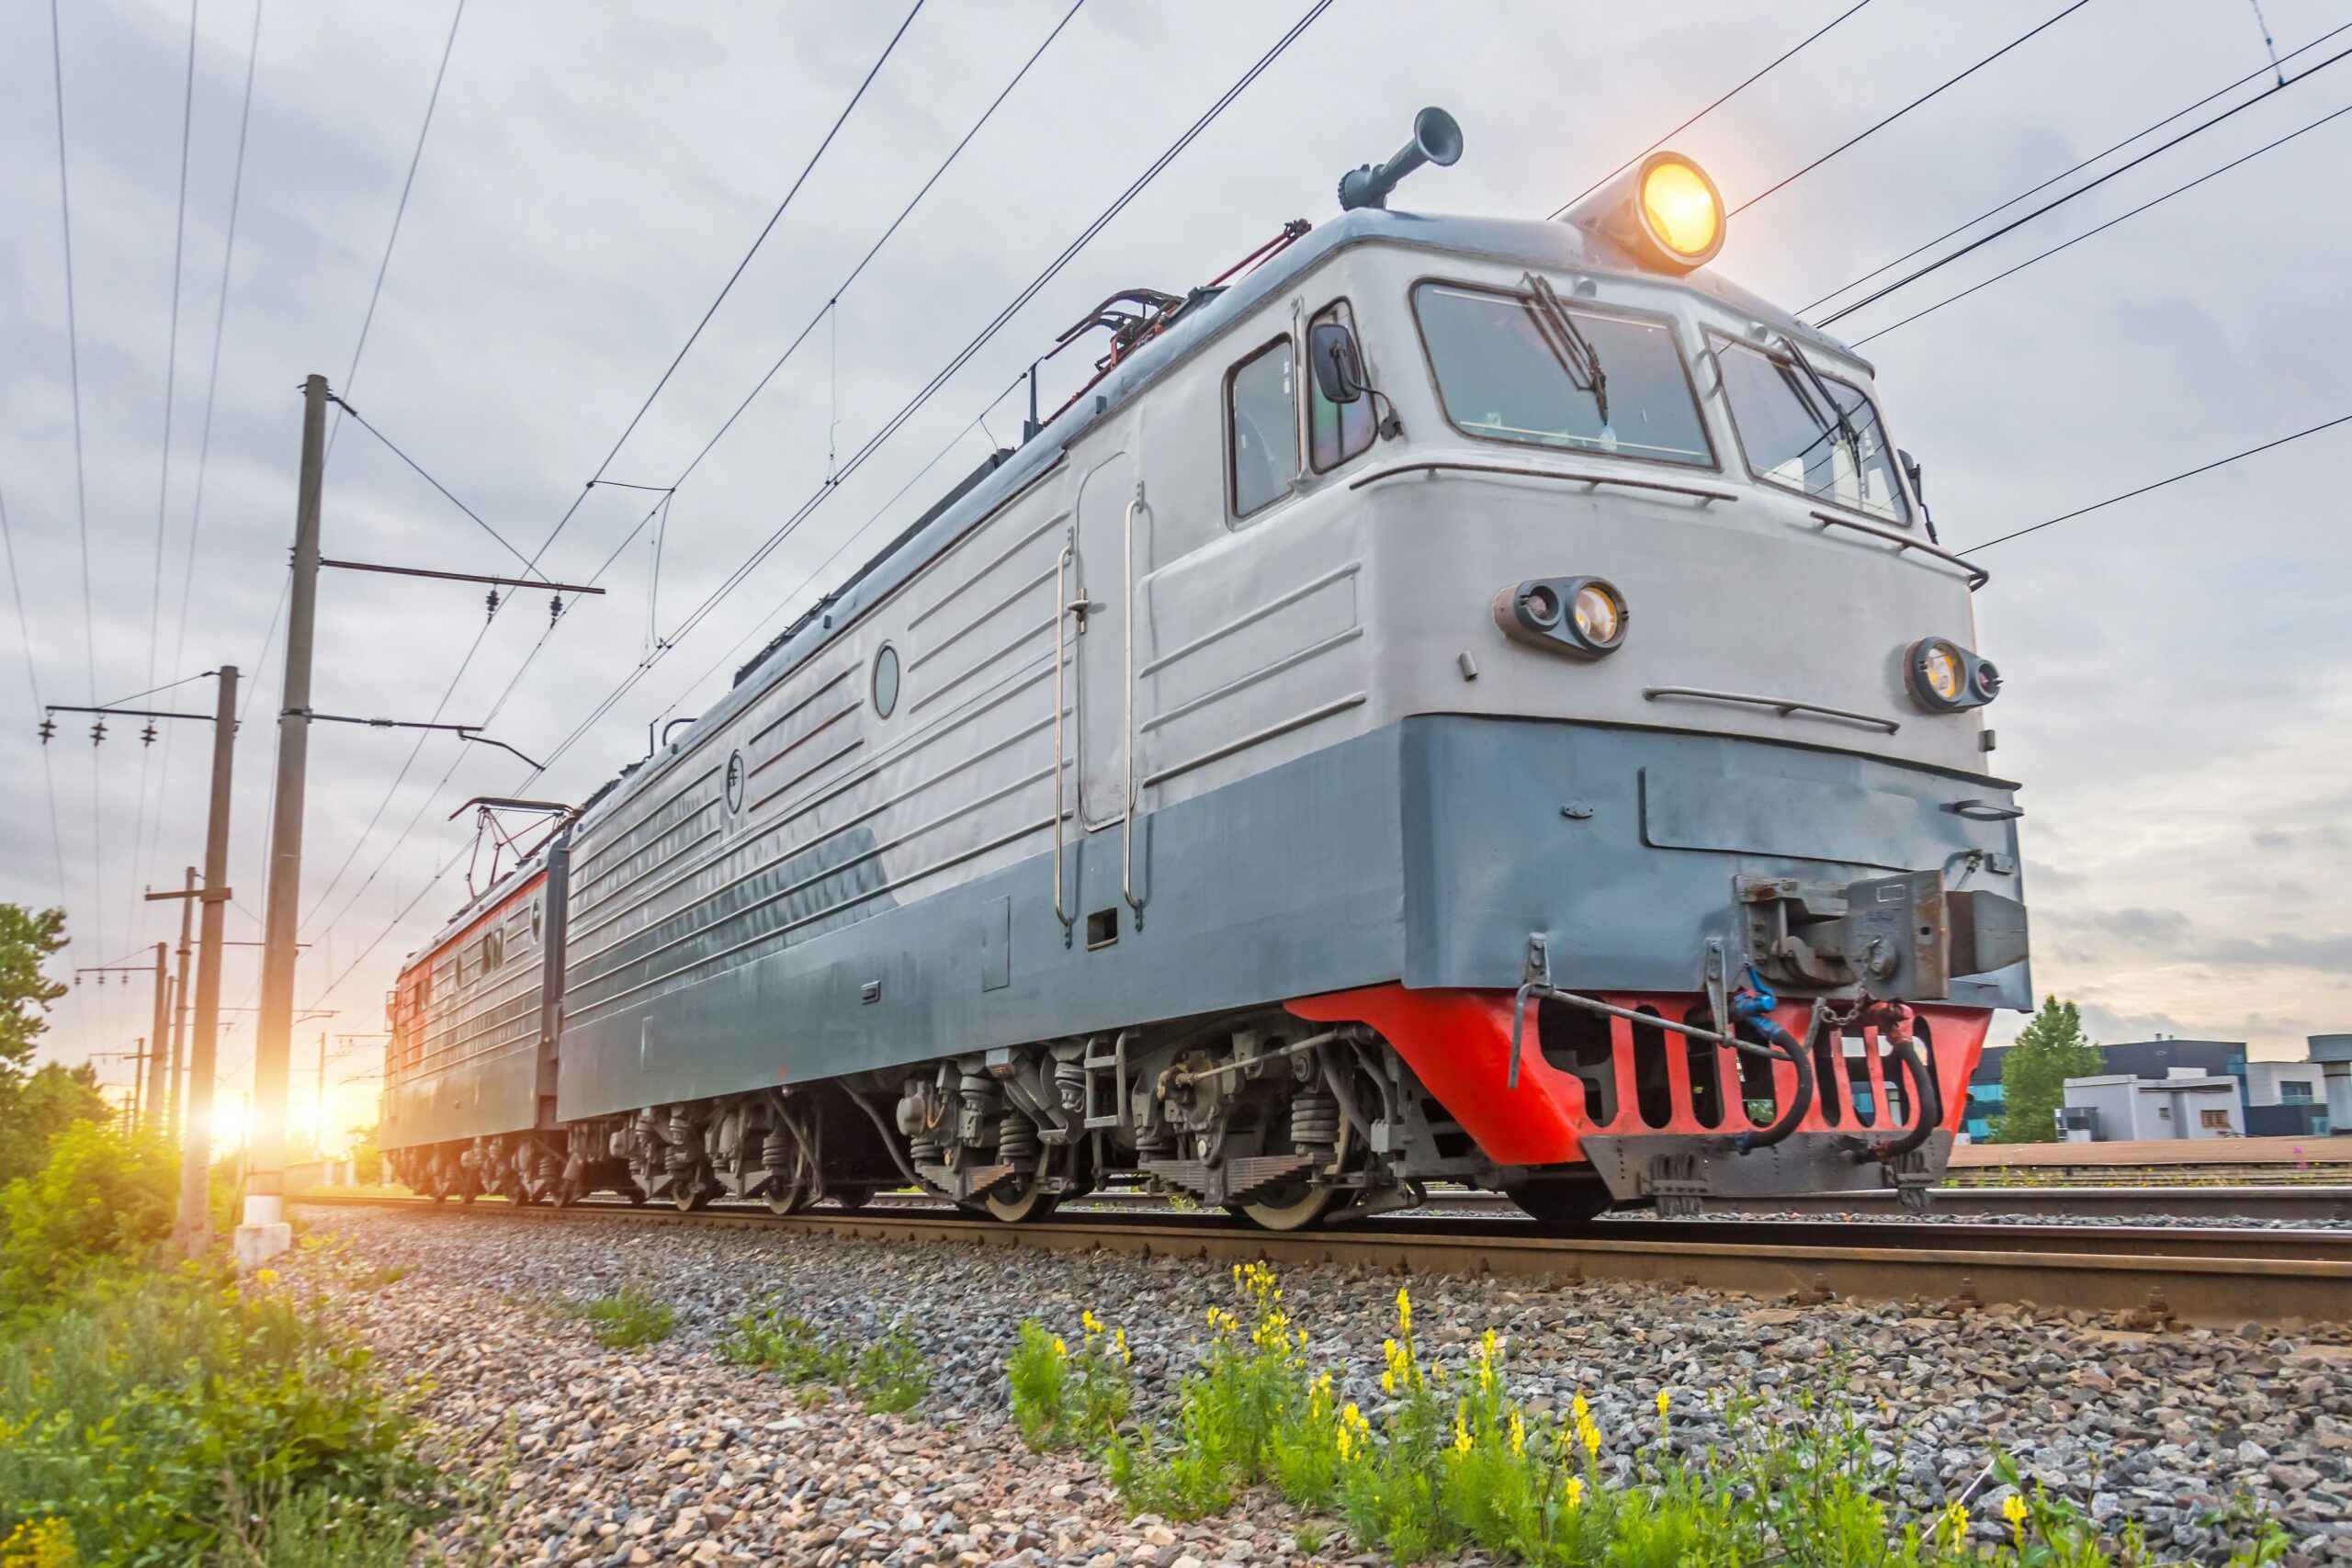 <p>A train trip that begins in Moscow and ends more than six days later in Vladivostok is the stuff of legends—the longest train rides in the world, and it's only <a href="https://www.cntraveler.com/story/with-the-trans-siberian-railway-japan-hopes-to-link-london-and-tokyo">getting longer.</a> The scenery continuously shifts as the train travels through multiple time zones, passing through the Ural Mountains, Lake Baikal, and all the desired steppes in between. Trains run every other day.</p>  <p> The trains on this route travel through the breathtaking Ural Mountains, the tranquil rivers Ob and Yenisey, Lake Baikal, Russia's border with Mongolia, Khabarovsk on the Amur River, and, at last, Vladivostok. On this network, three trains with rather different routes run: the Trans-Siberian Train, the Trans-Mongolian Train, and the Trans-Manchurian Train.</p>  <p class="feed-msn-follow"><a href="https://www.msn.com/en-us/channel/source/Nerdable/sr-vid-gmj43dq8m5ghrcf2mwp5i0geq46m7i5i2x69fct9gf7enekuucas?item=themed_featuredapps_enableD"><strong>Follow us on MSN for more exclusive content!</strong></a></p>